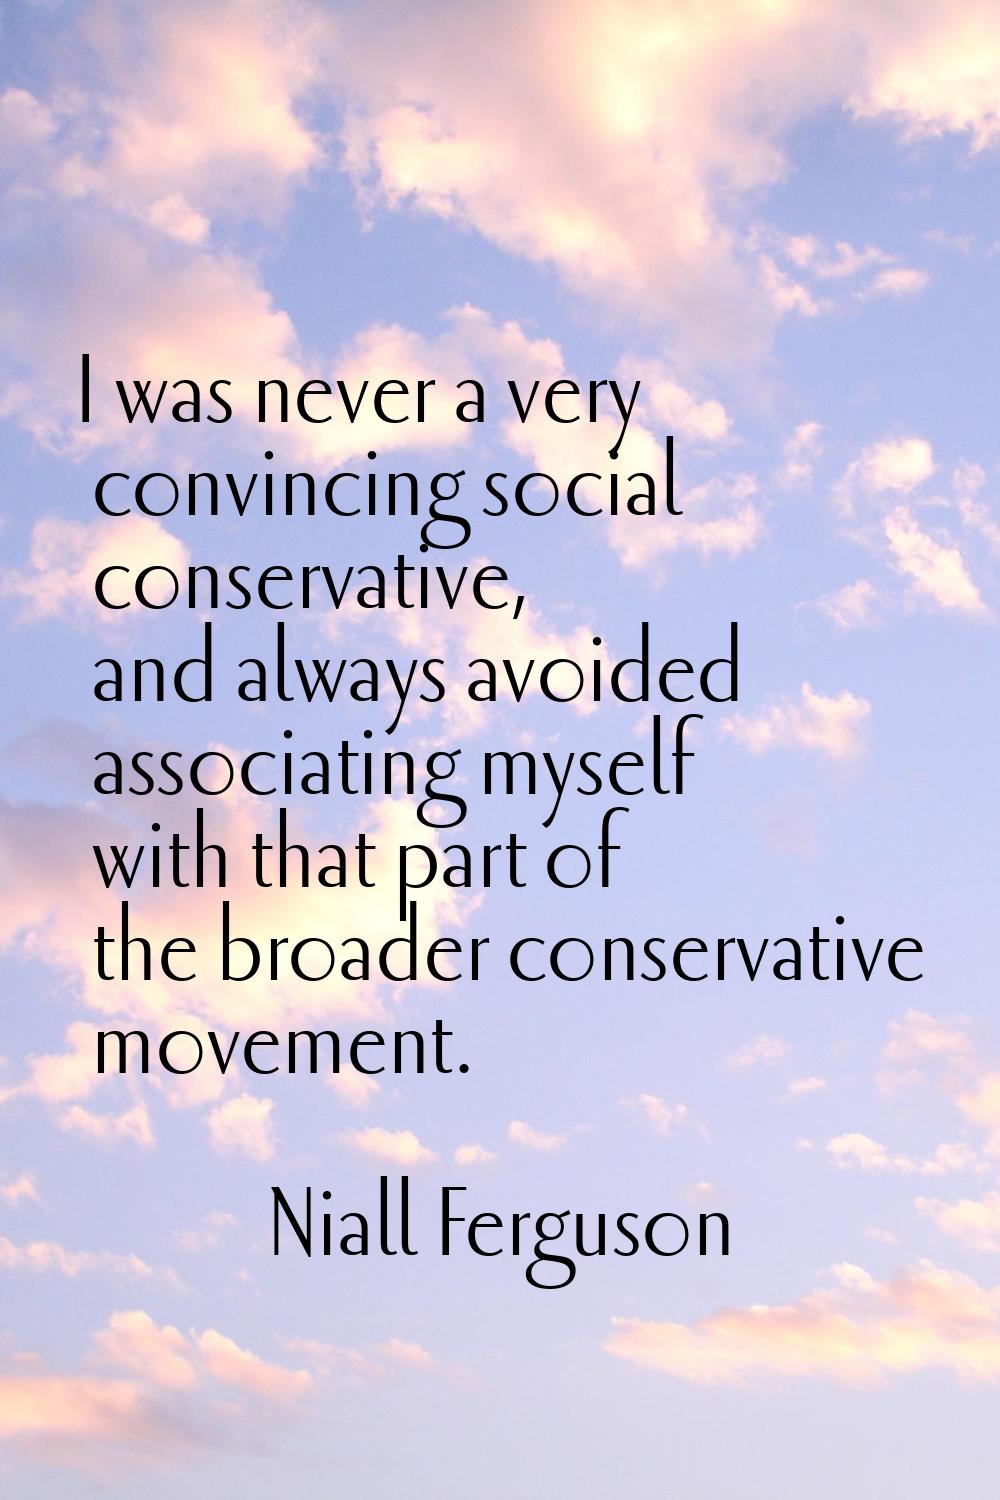 I was never a very convincing social conservative, and always avoided associating myself with that 